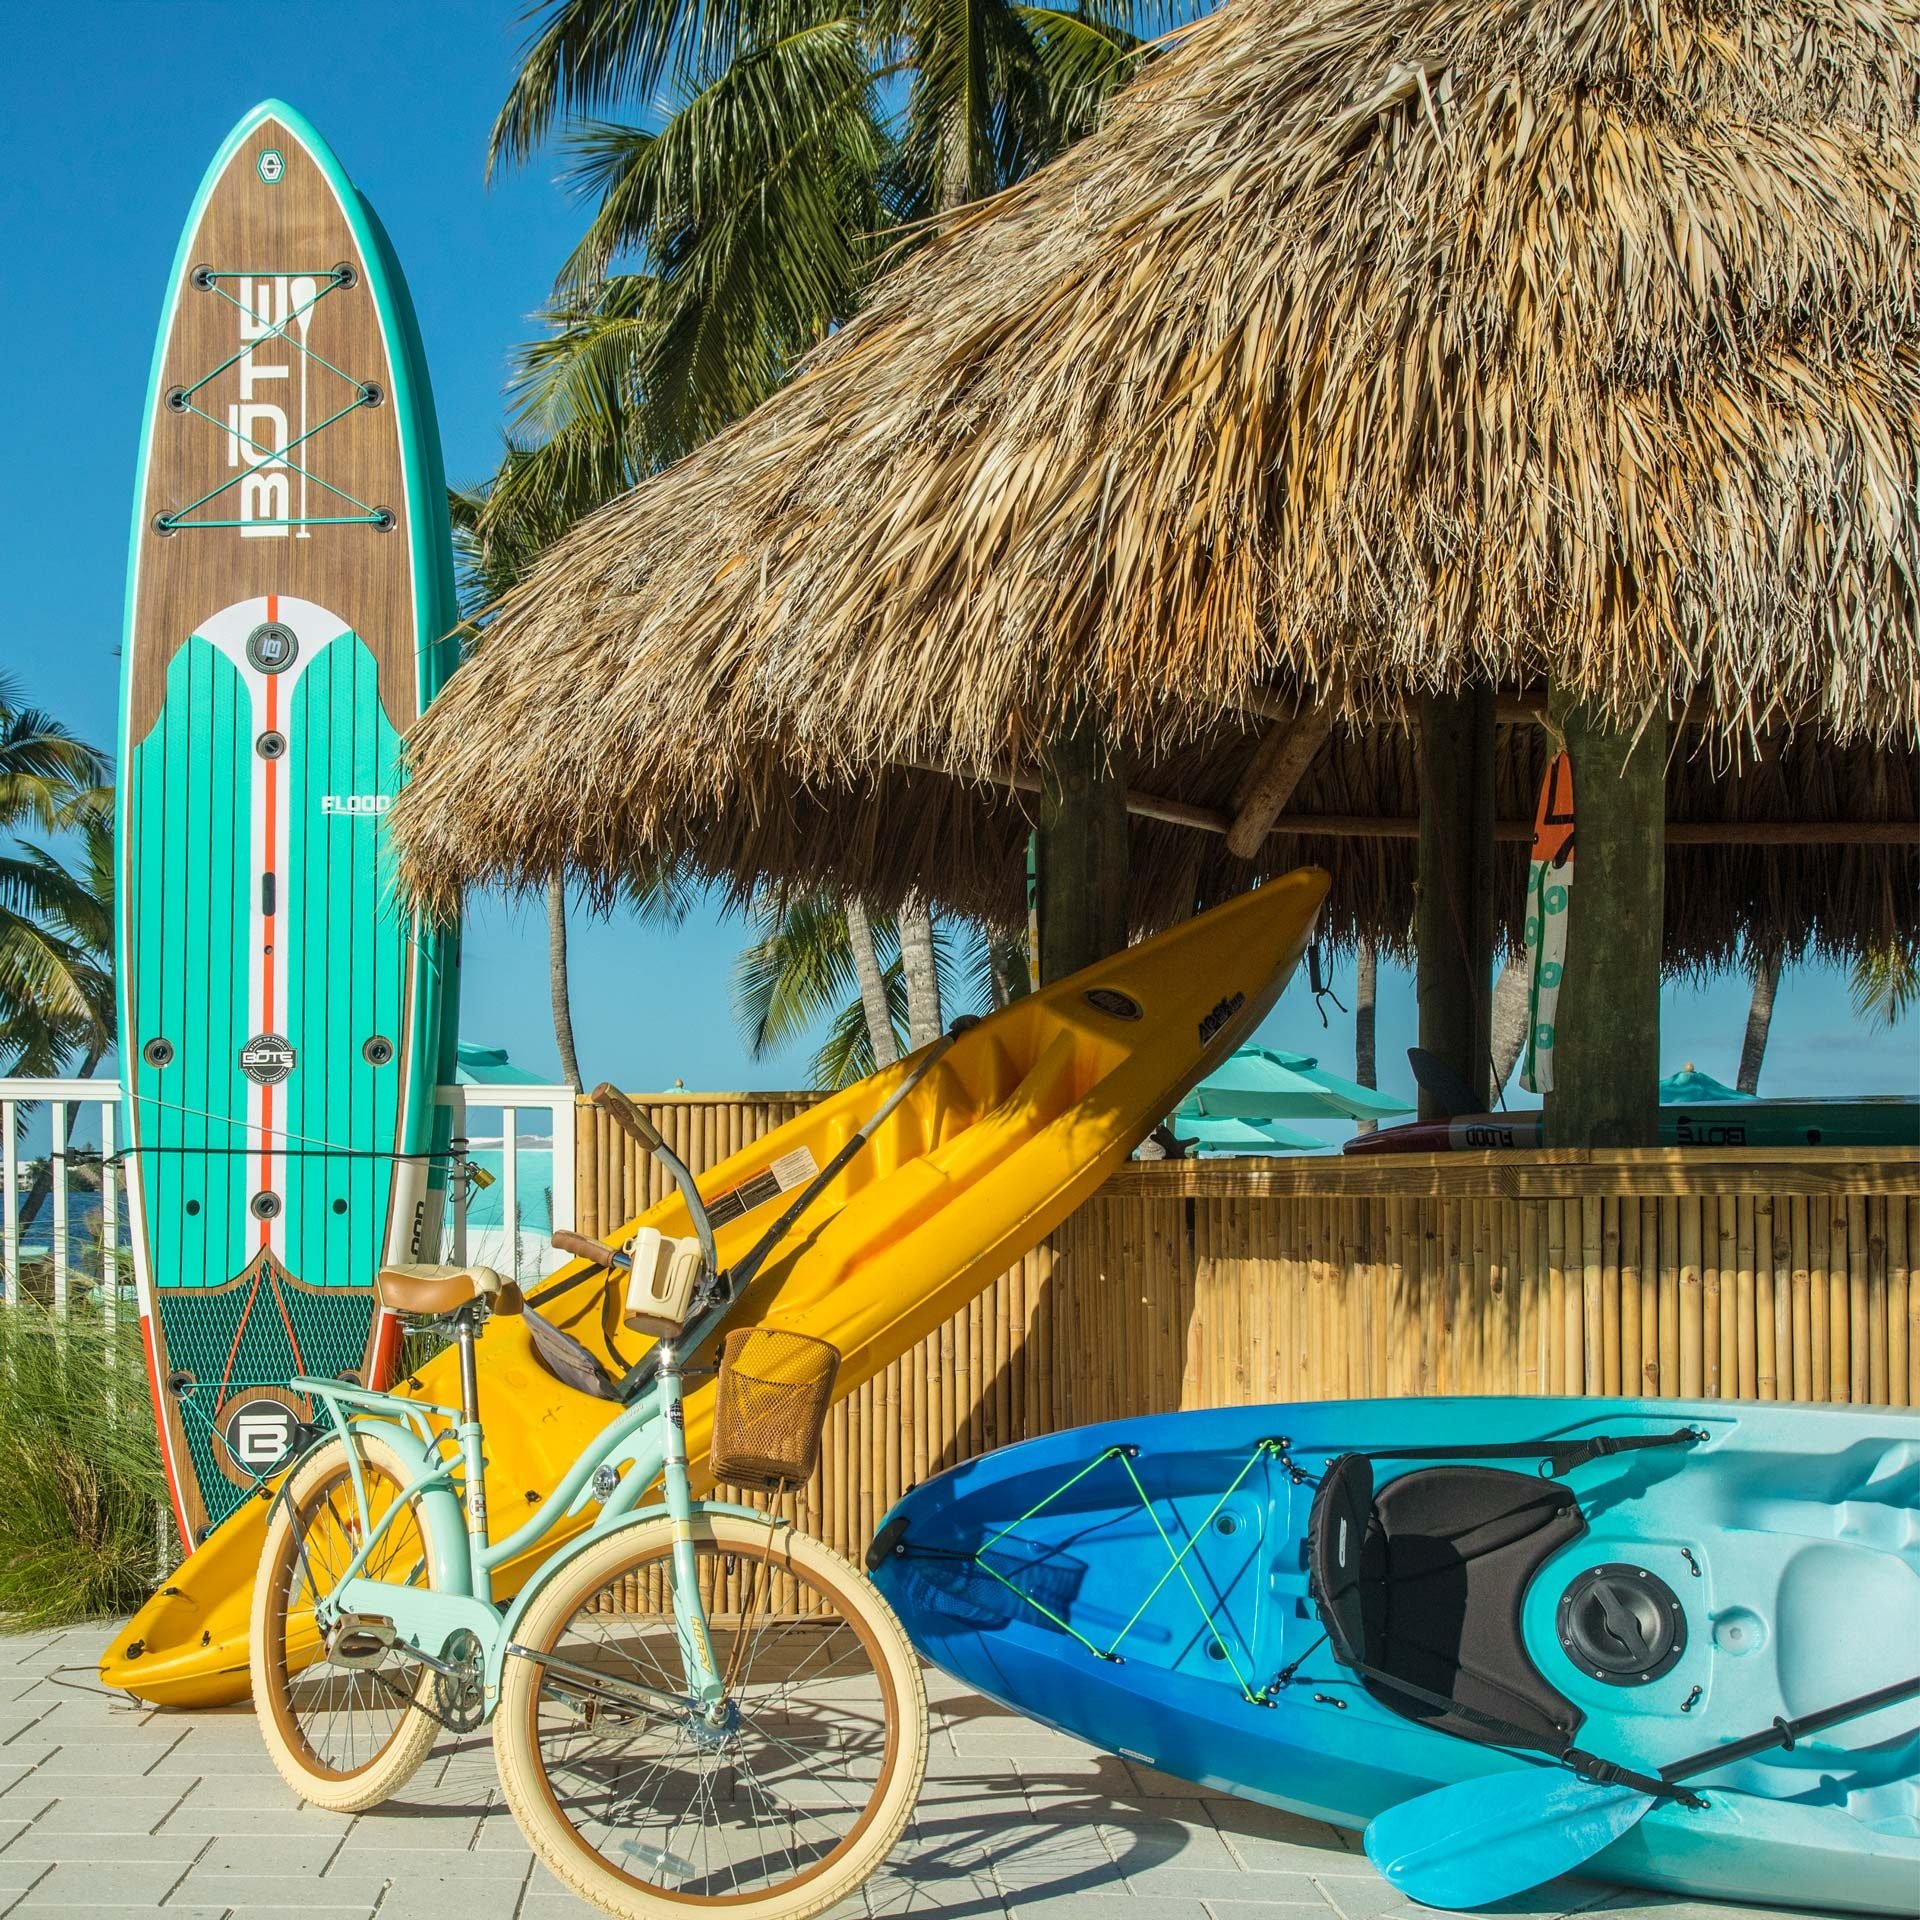 paddleboards, kayaks and a bicycle